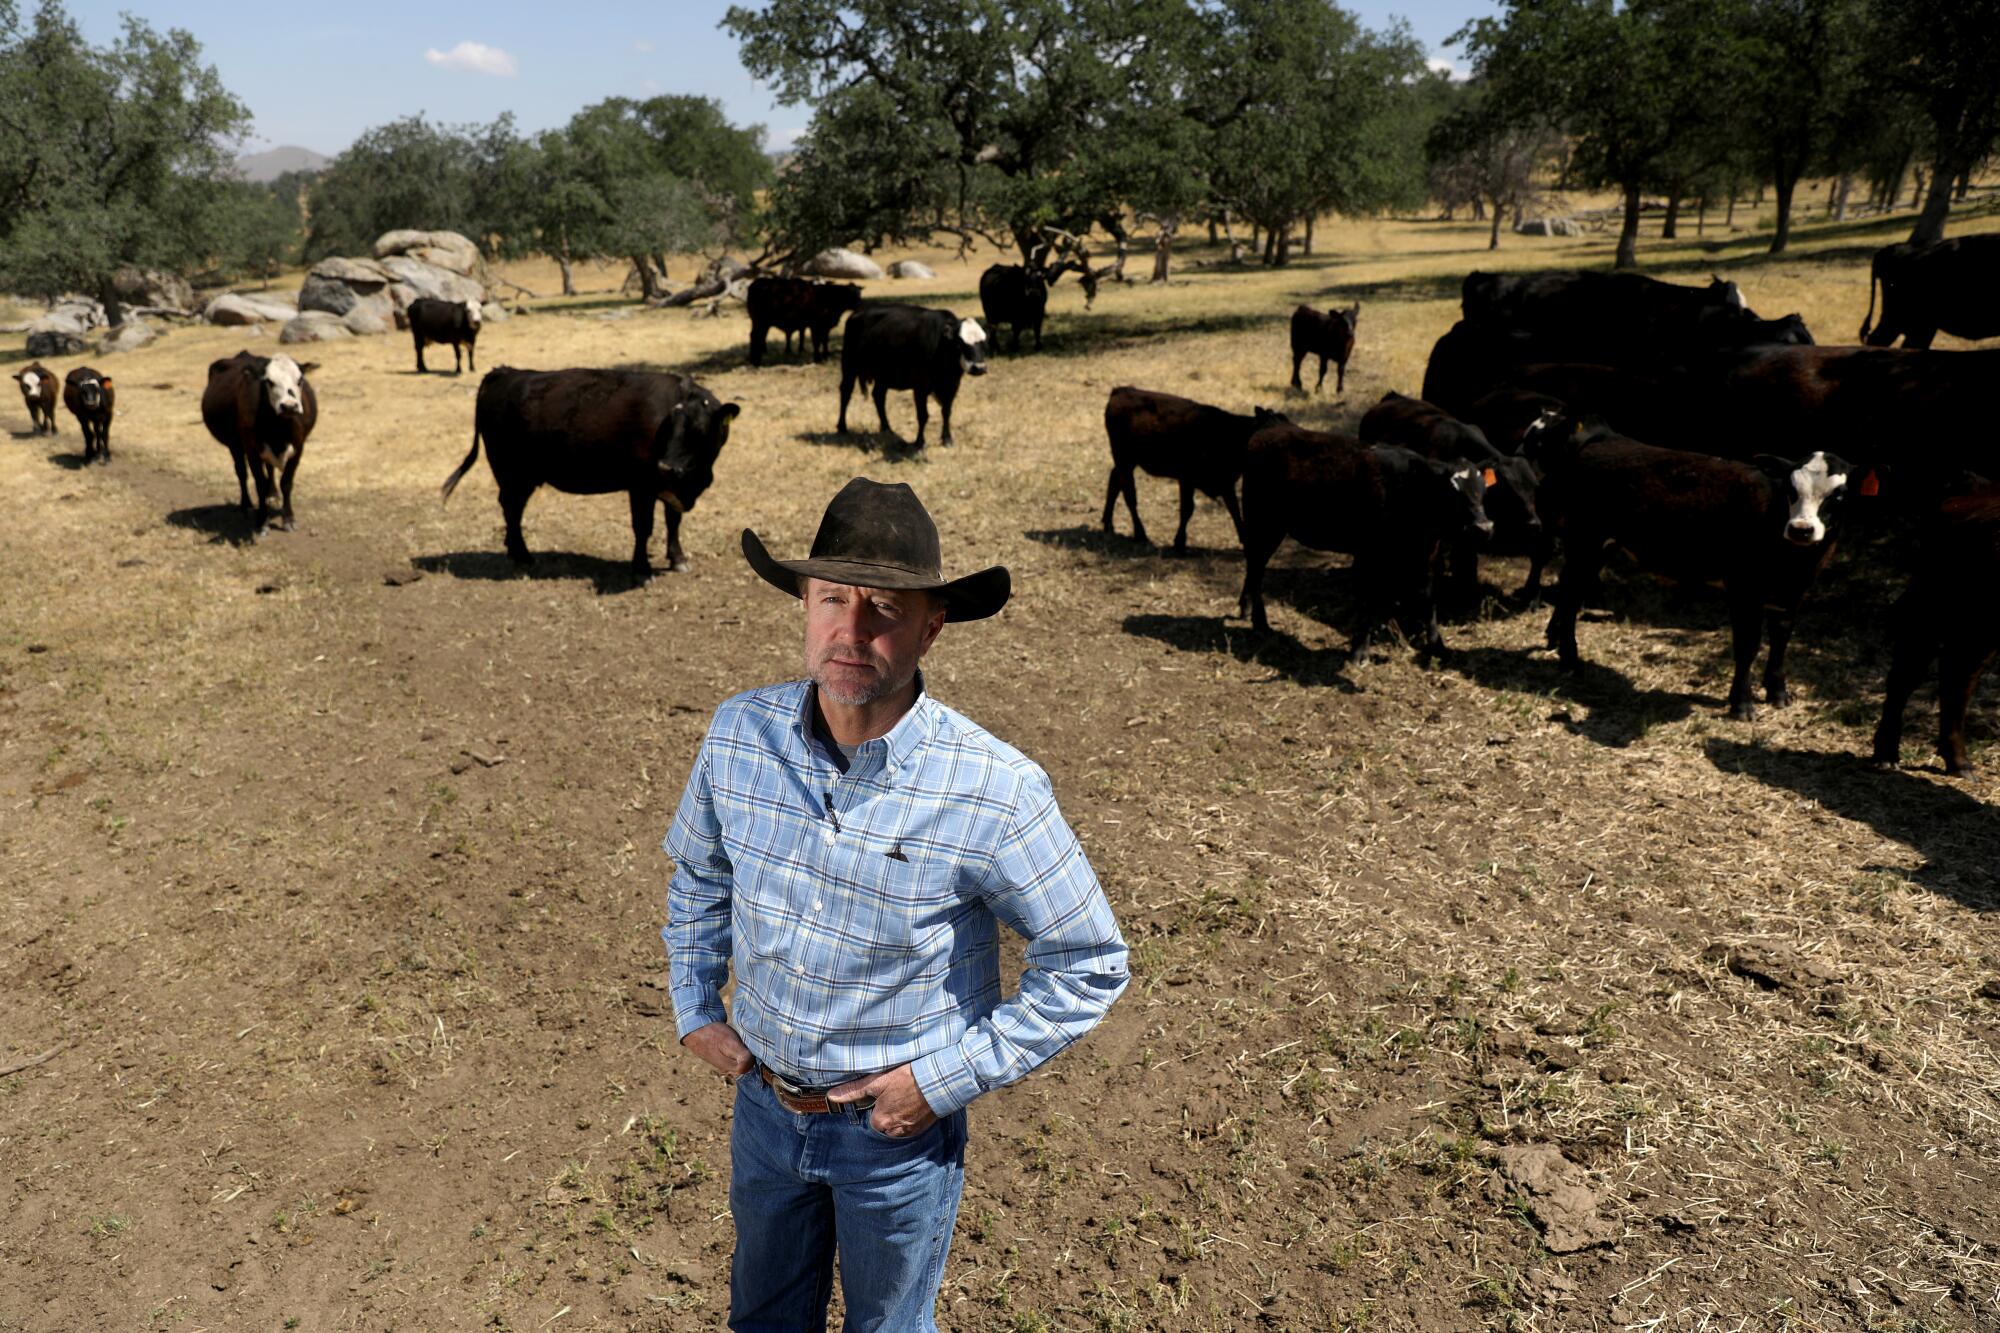 John Guthrie on his cattle ranch and farm with cattle behind him.